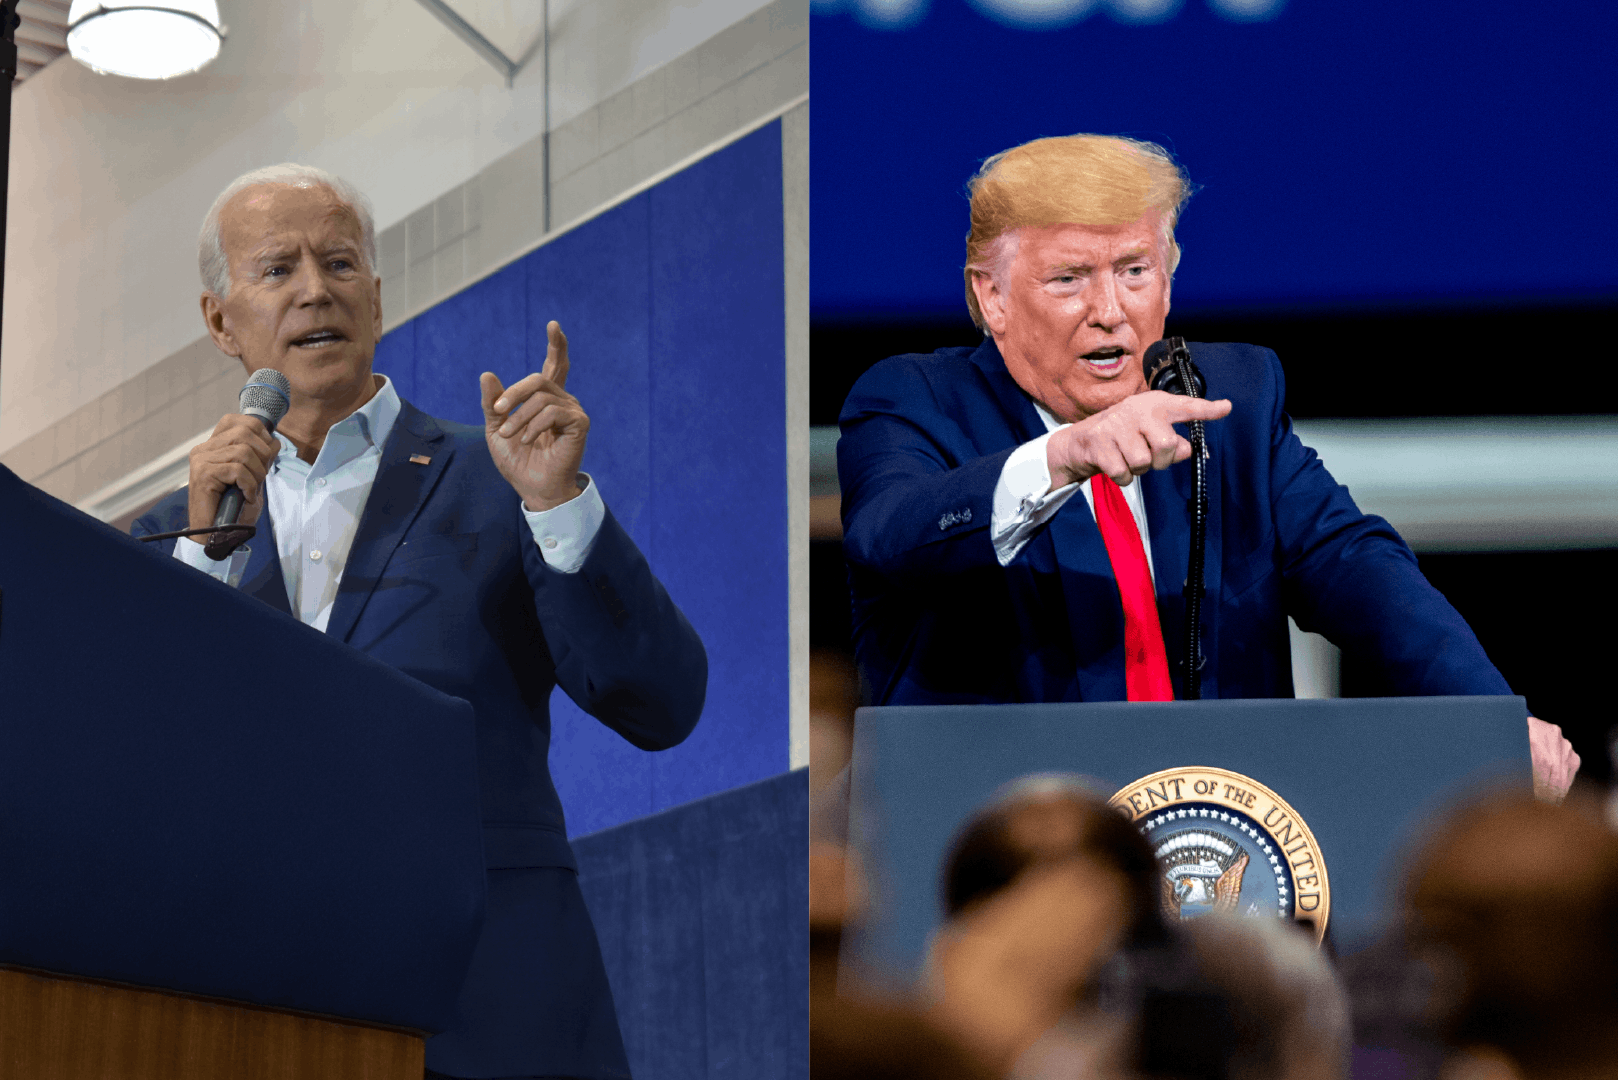 <p>Former Vice President Joe Biden speaks at a rally for Democratic congressional candidate Elissa Slotkin on Nov. 1, 2018 (left) and President Donald Trump gives remarks at Dana Incorporated in Warren, MI on Jan. 30, 2020 (right).</p>